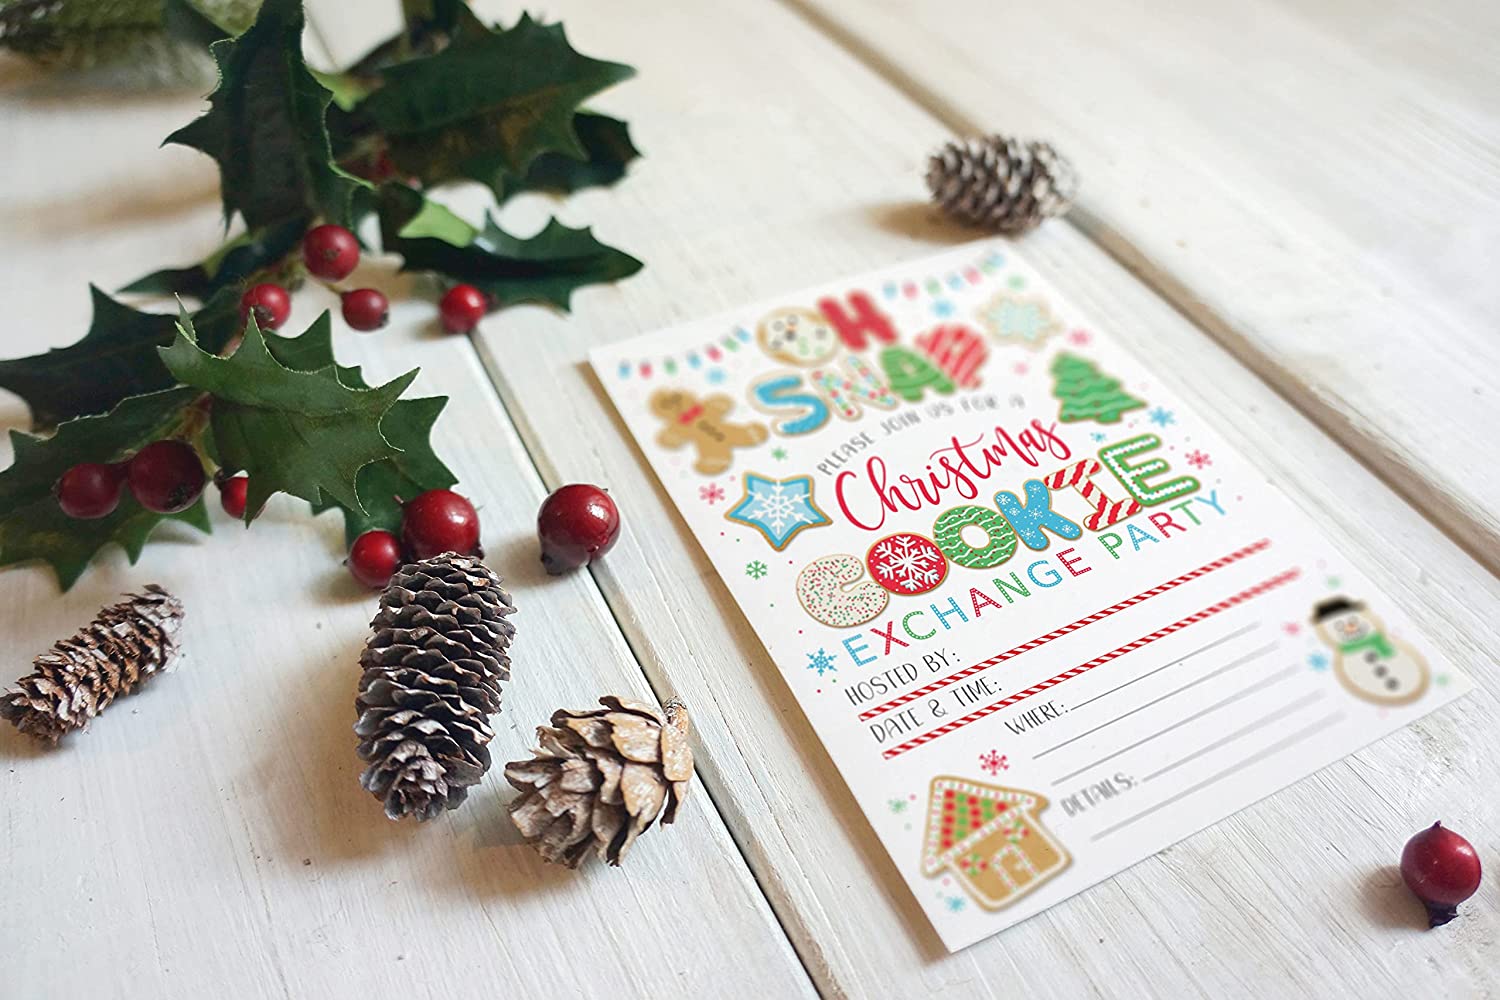 Christmas Cookie Exhange Decorating Party Invitation Printable - Your Main Event